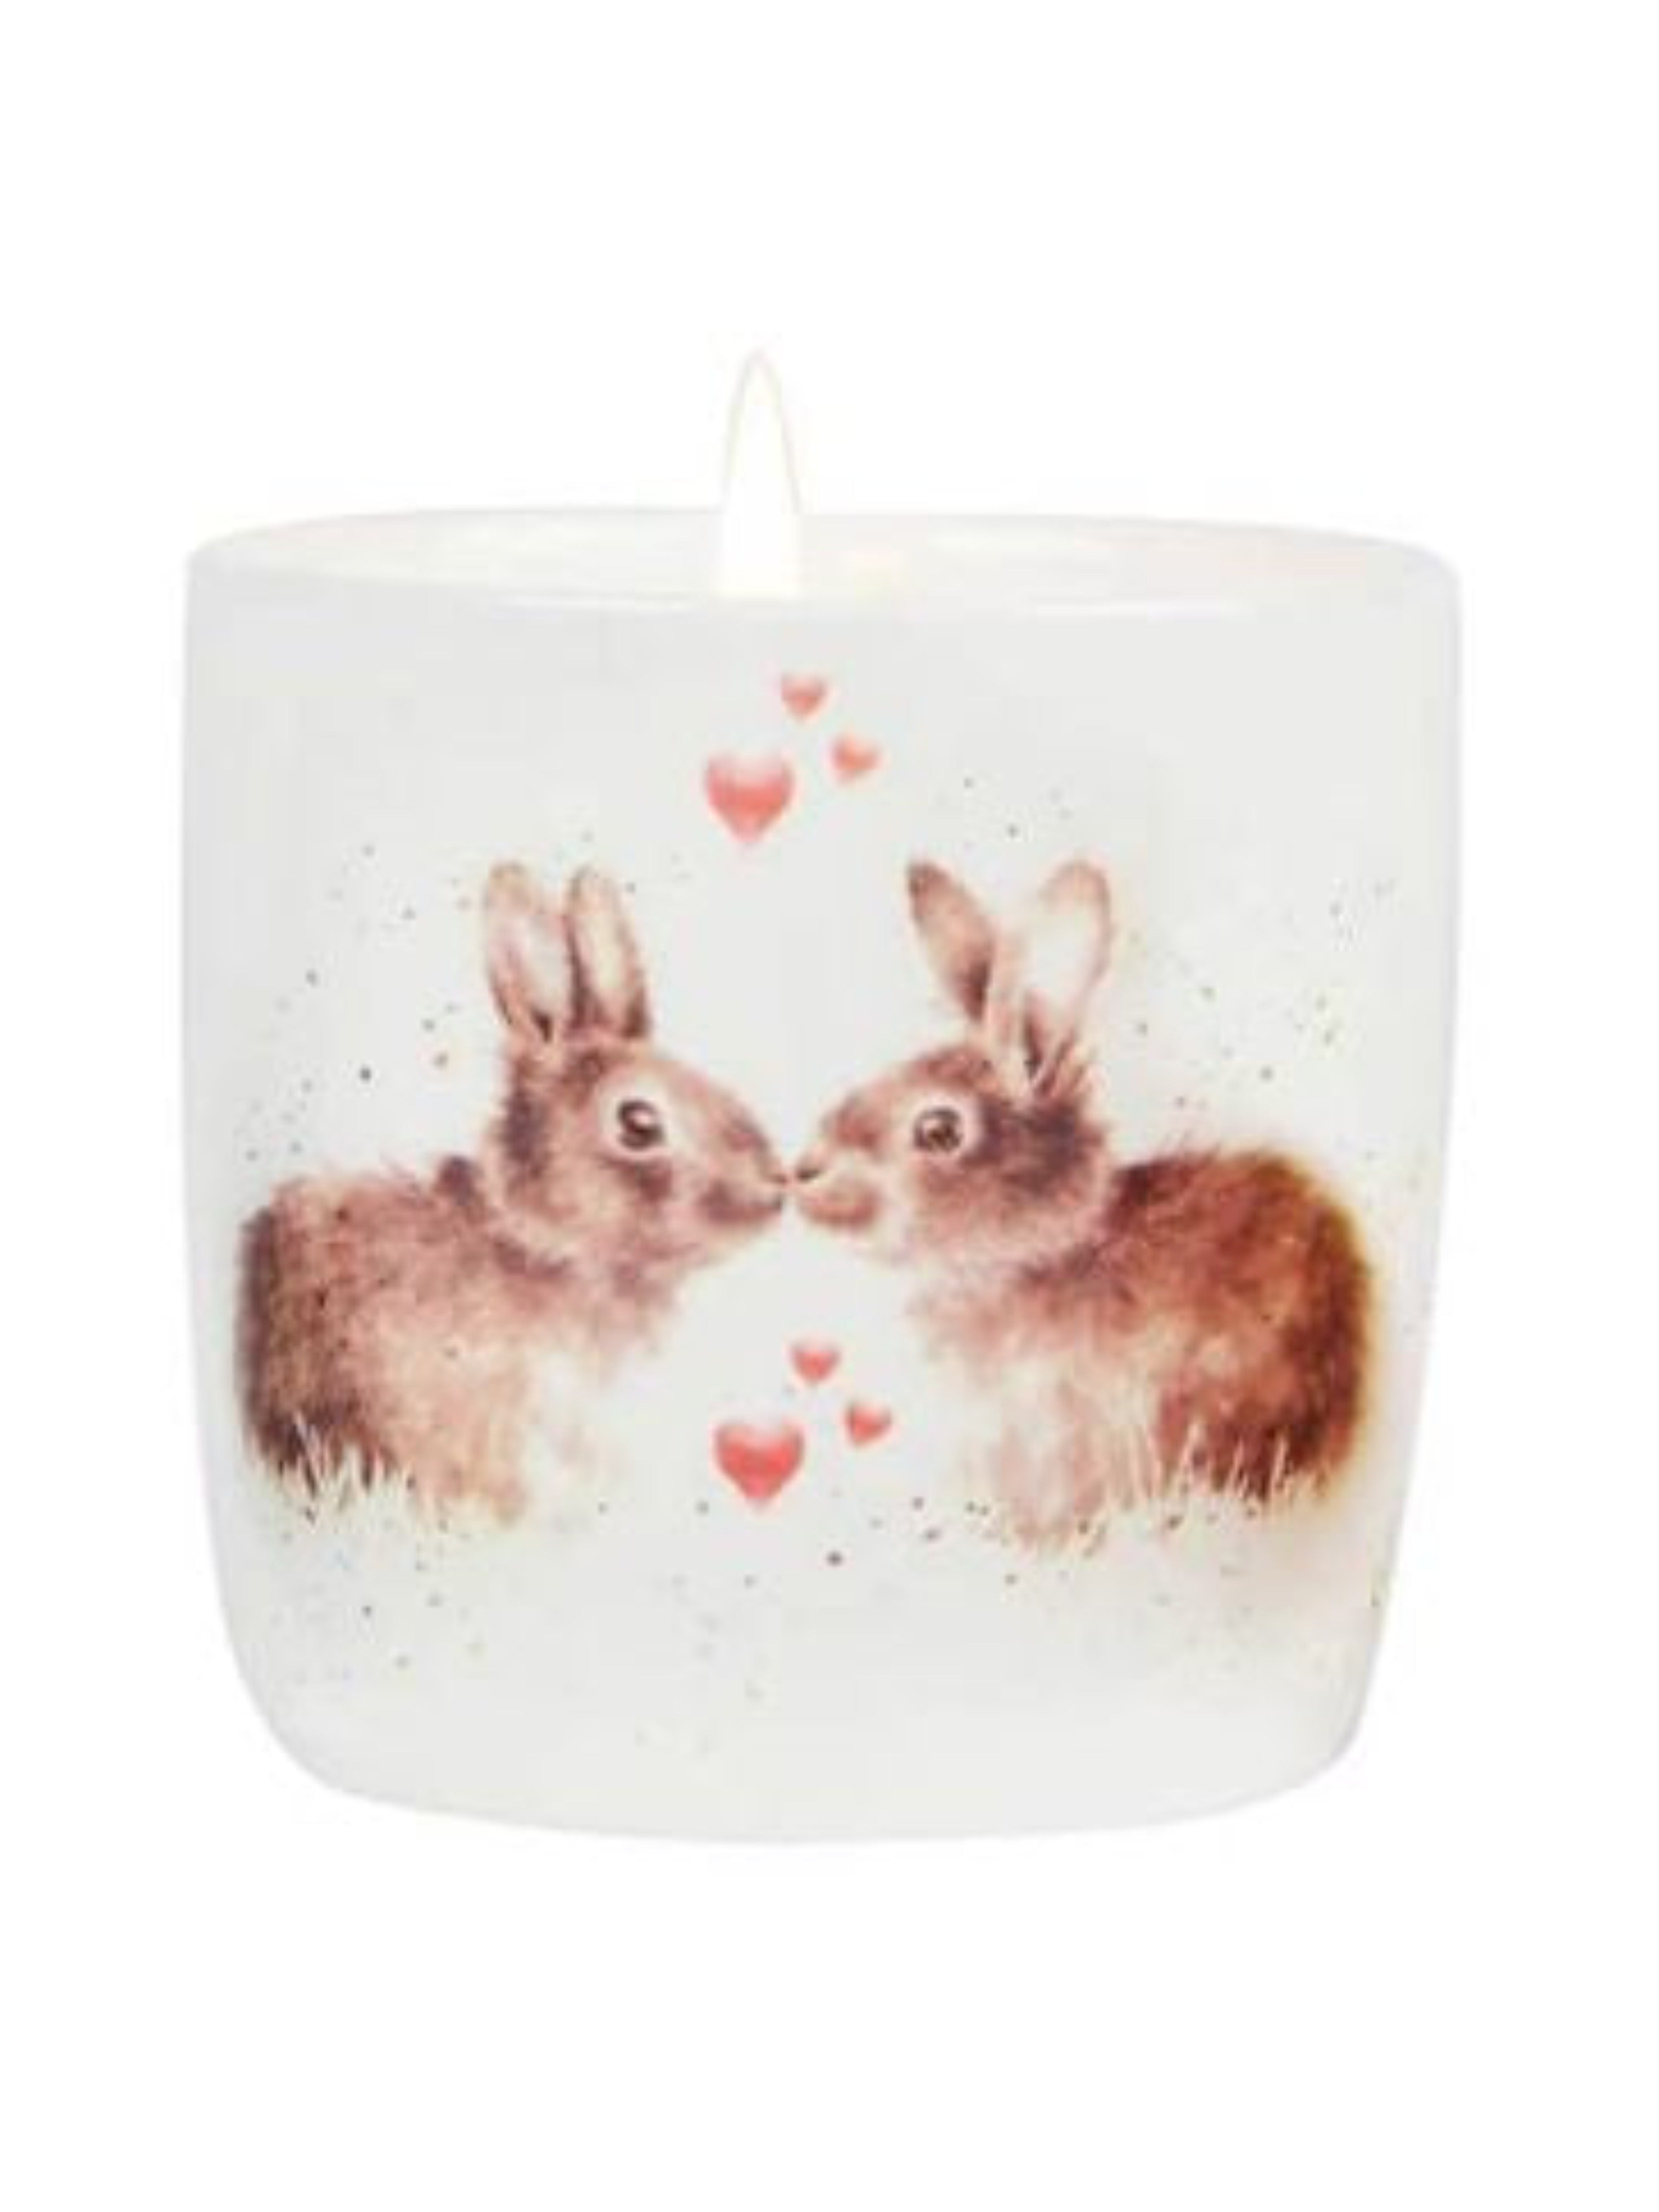 ‘Hoppily’ Ever After Candle